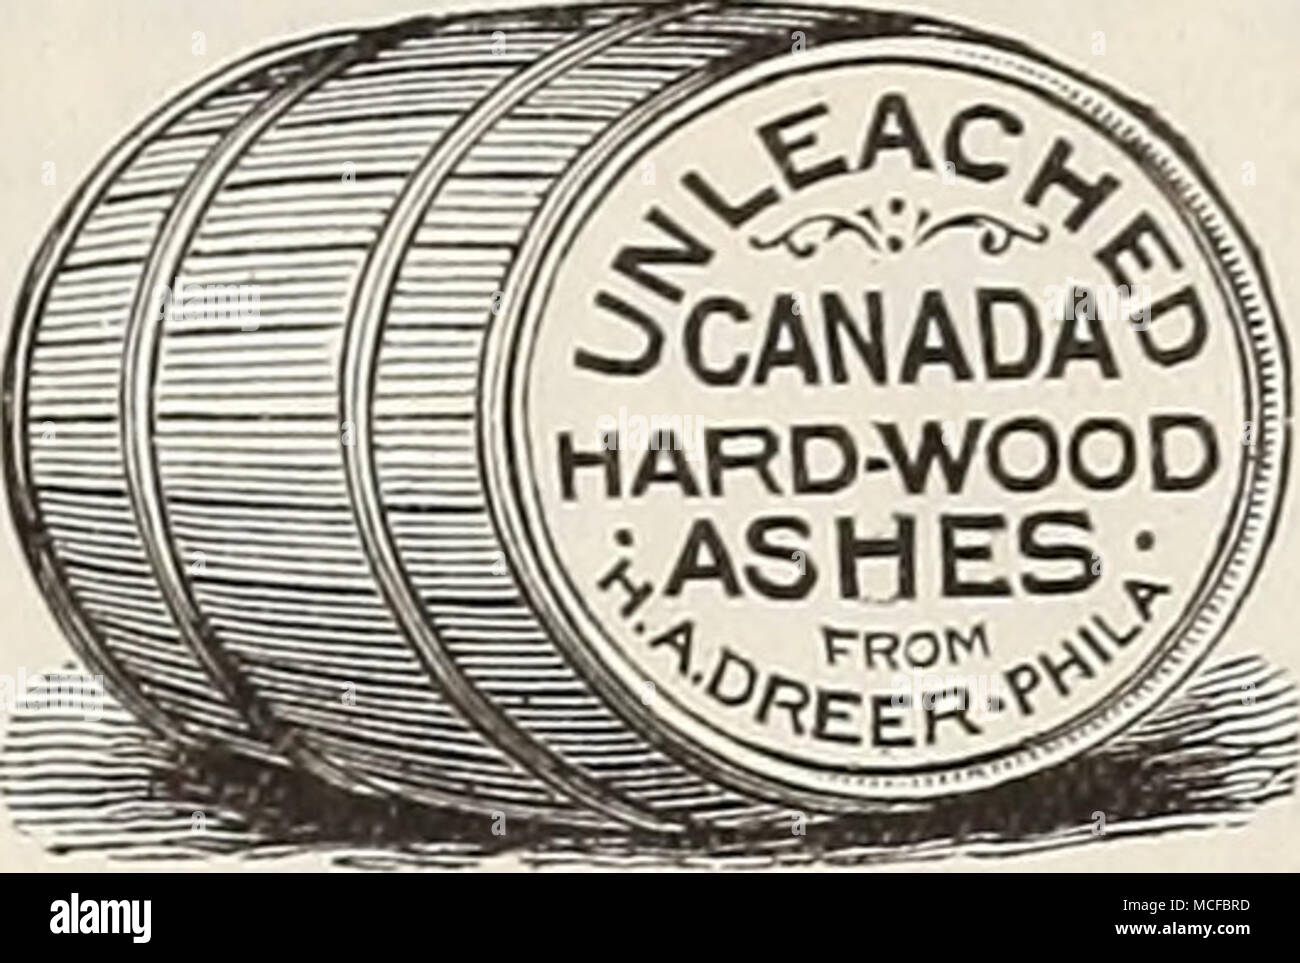 . Canada Hard-wood Ashes. Indispensable as a lawn dressing, or to apply to or- chards. They should be ap- plied late in fall or early in spring, so that the rains and snows may leach the ashes and carry the elements down to the roots of grass or trees. Our ashes are screened and are in proper condition for immediate use. Apply at the rate of 1000 to 1500 lbs. per acre. 50 lbs. $1.00; per bbl. $2.50; ton $18.00. Clay's Fertilizer. This valuable imported manure is especially recommended to all who grow either fruit, flowers or vegetables, and wish to bring them to the highest perfec- tion. Shoul Stock Photo